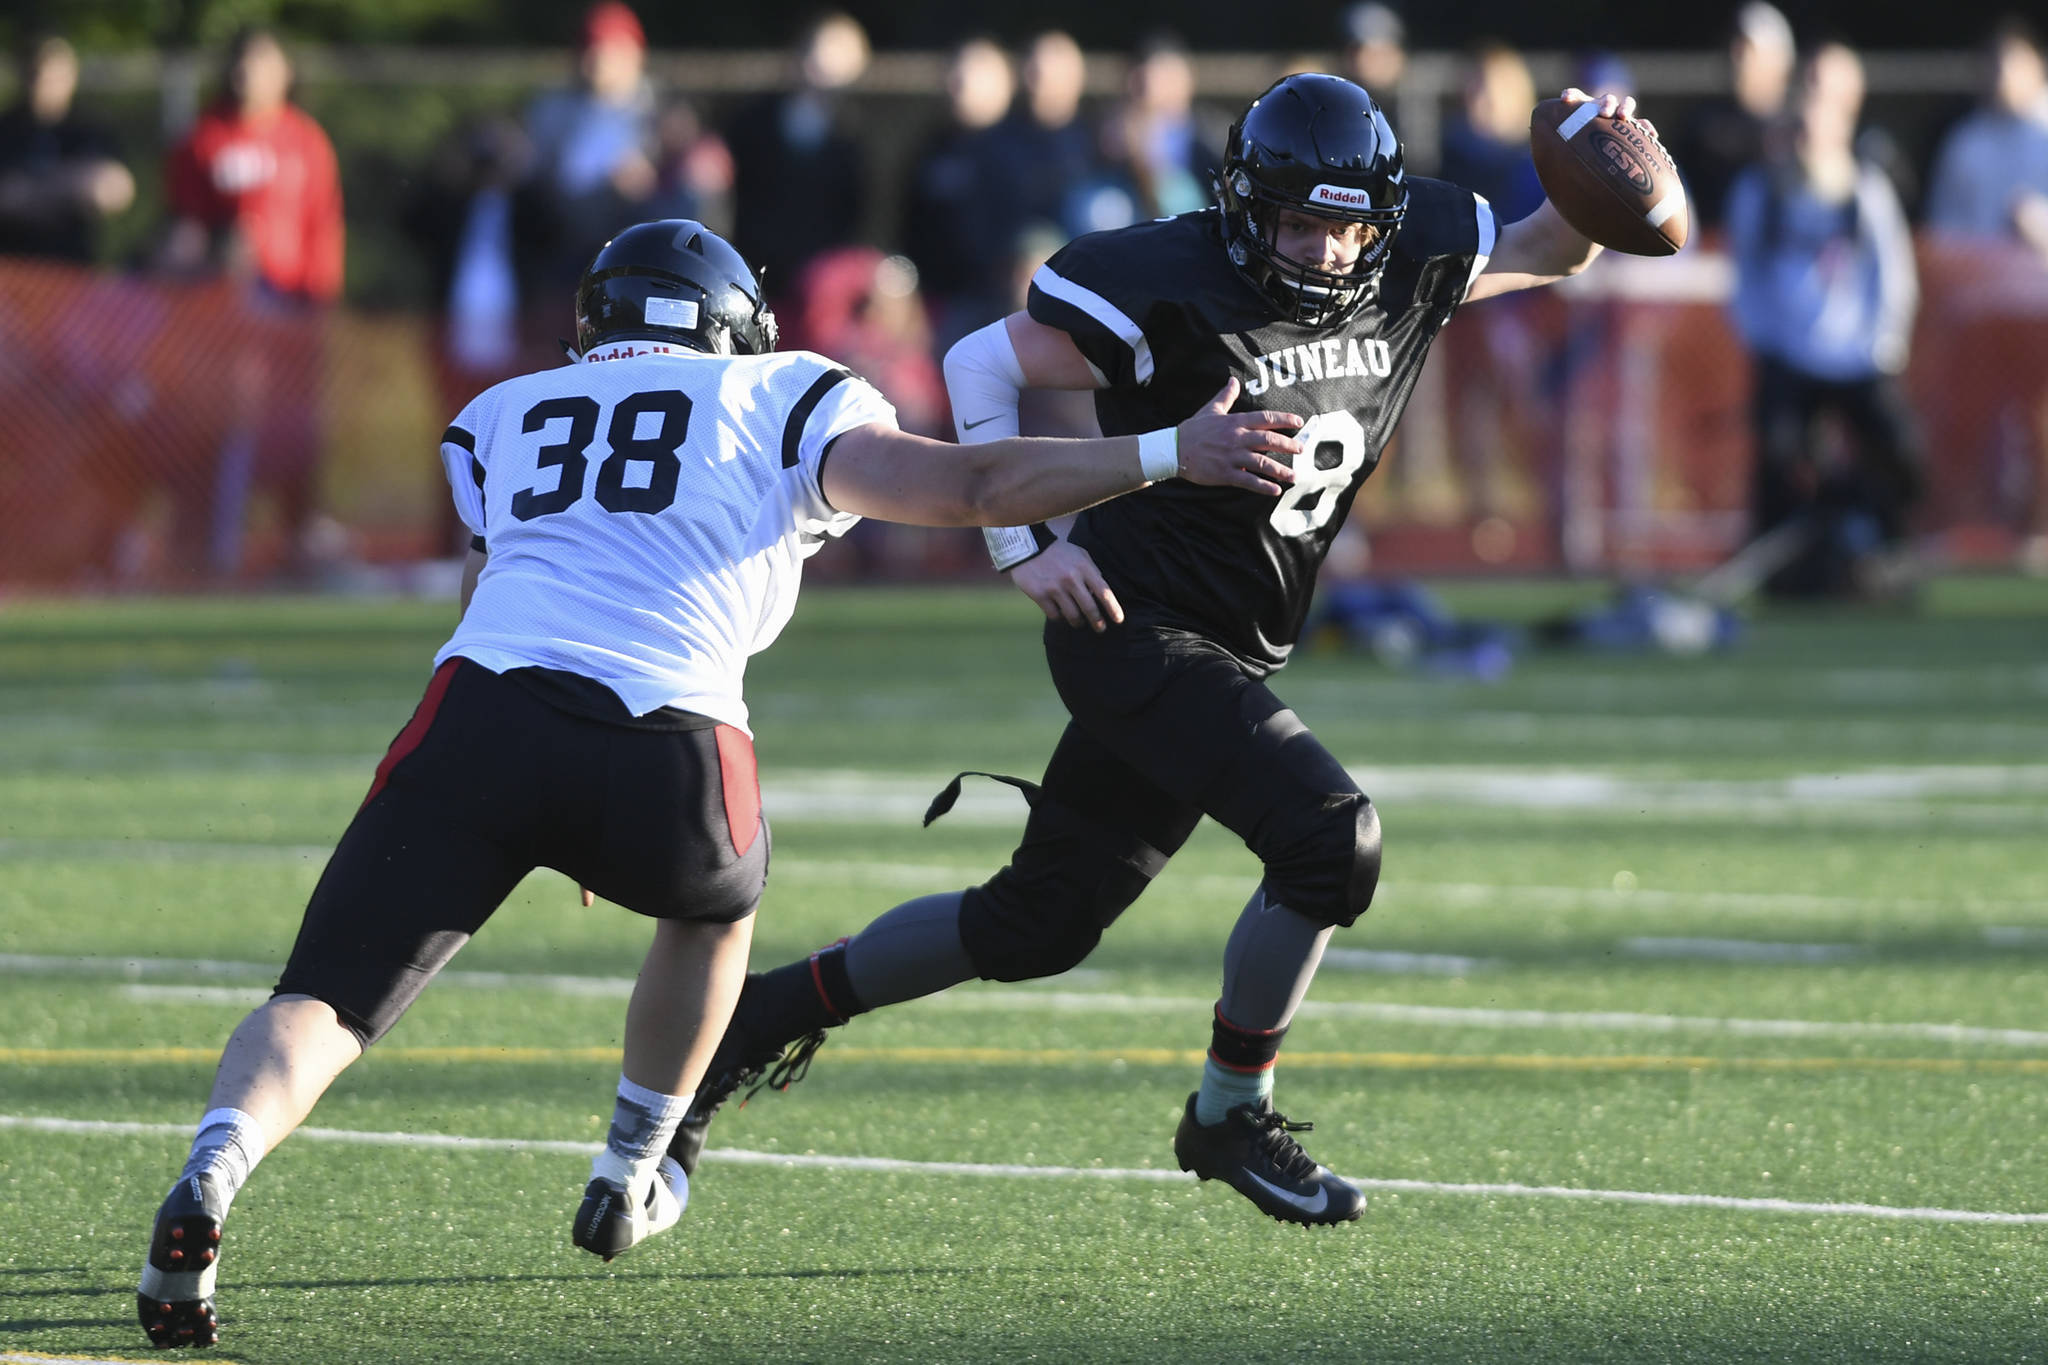 Legends’ Stefan Jones, right, is pursued by Stars’ Dylan Skrzynski in the Juneau Alumni Football Game on Friday, May 24, 2019. Jones is wearing one of 40 new helmets a group of alumni helped purchase that will be donated to the high school program. (Michael Penn | Juneau Empire File)